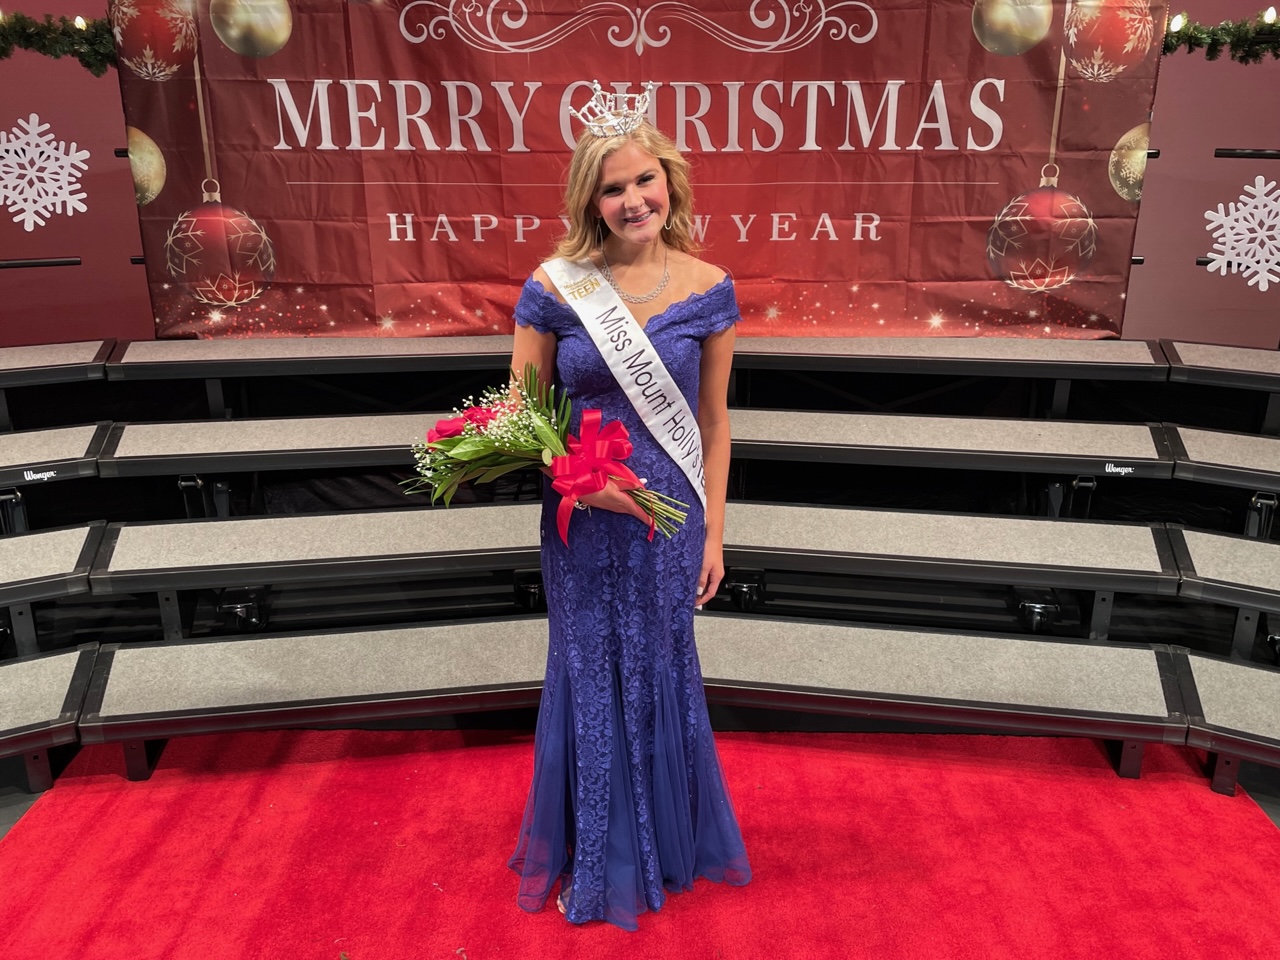 Miss Mount Holly's Outstanding Teen 2023 Reece Williams